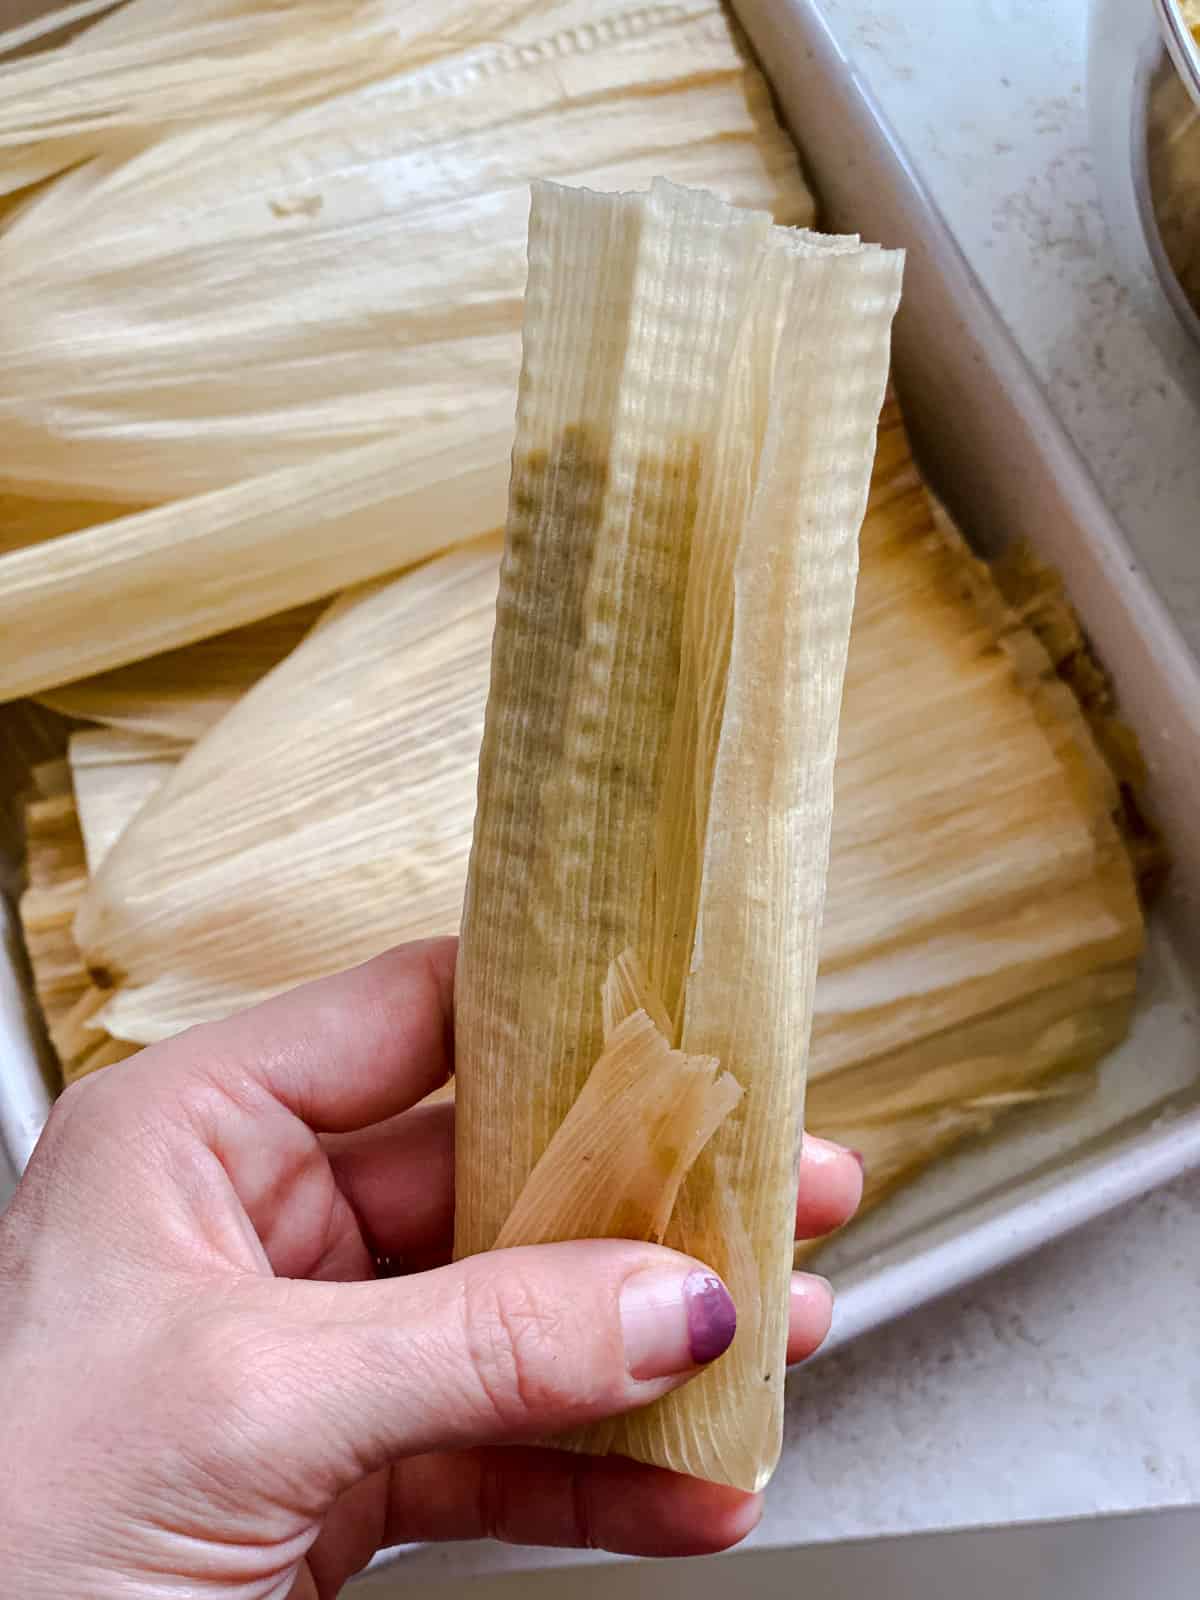 process shot of rolling corn husk to hold tamales mixture